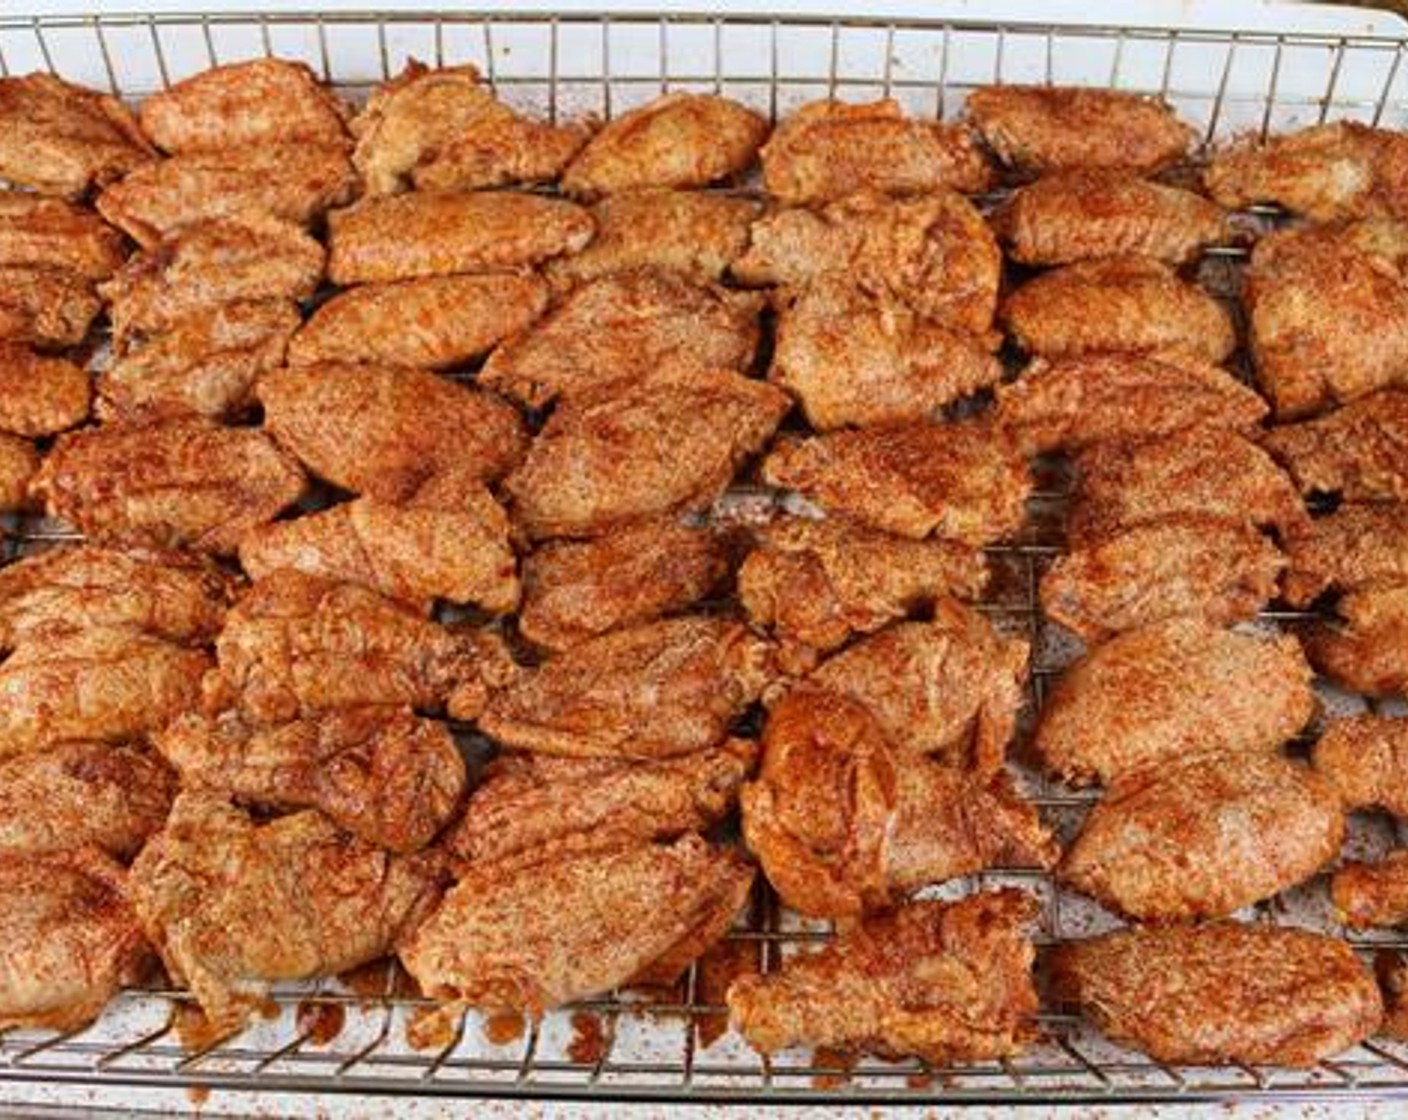 step 6 Drain the wings and arrange on a cooking rack. Season each side with the All-Purpose Spice Rub (1/2 cup) and Barbecue Rub (1/2 cup).